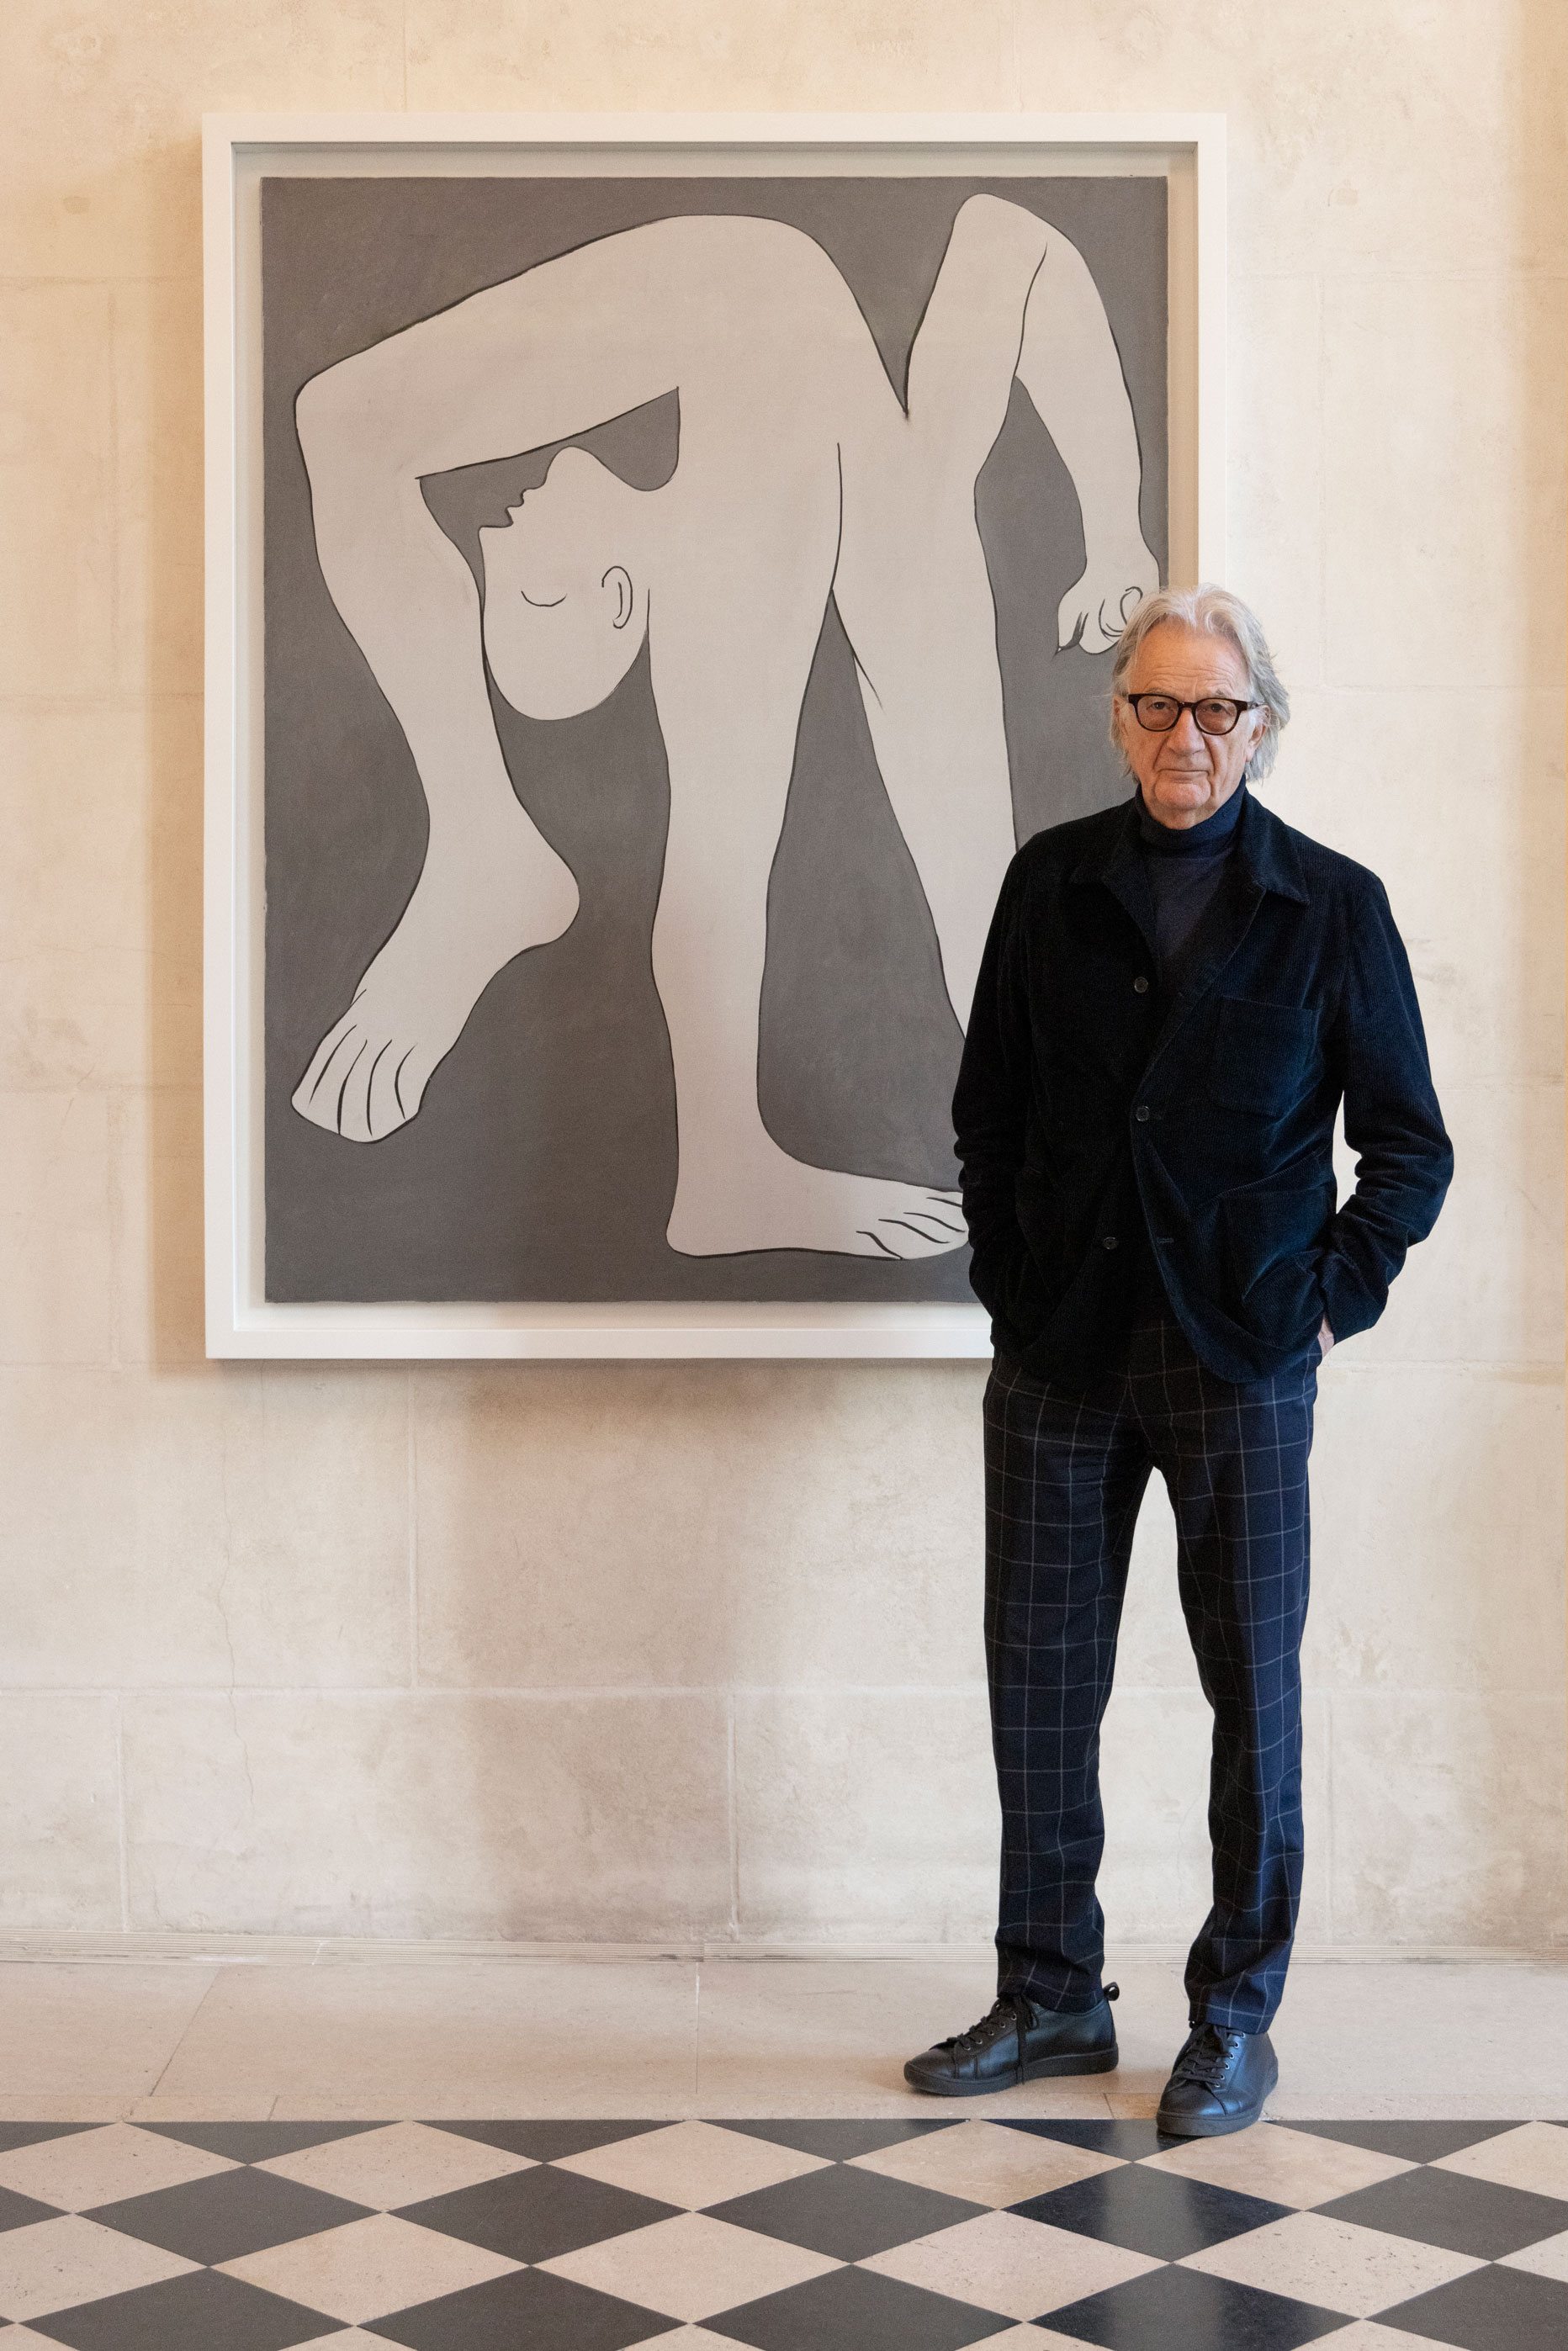 Portrait of Paul Smith in front of "L'Acrobate" by Pablo Picasso (1930)